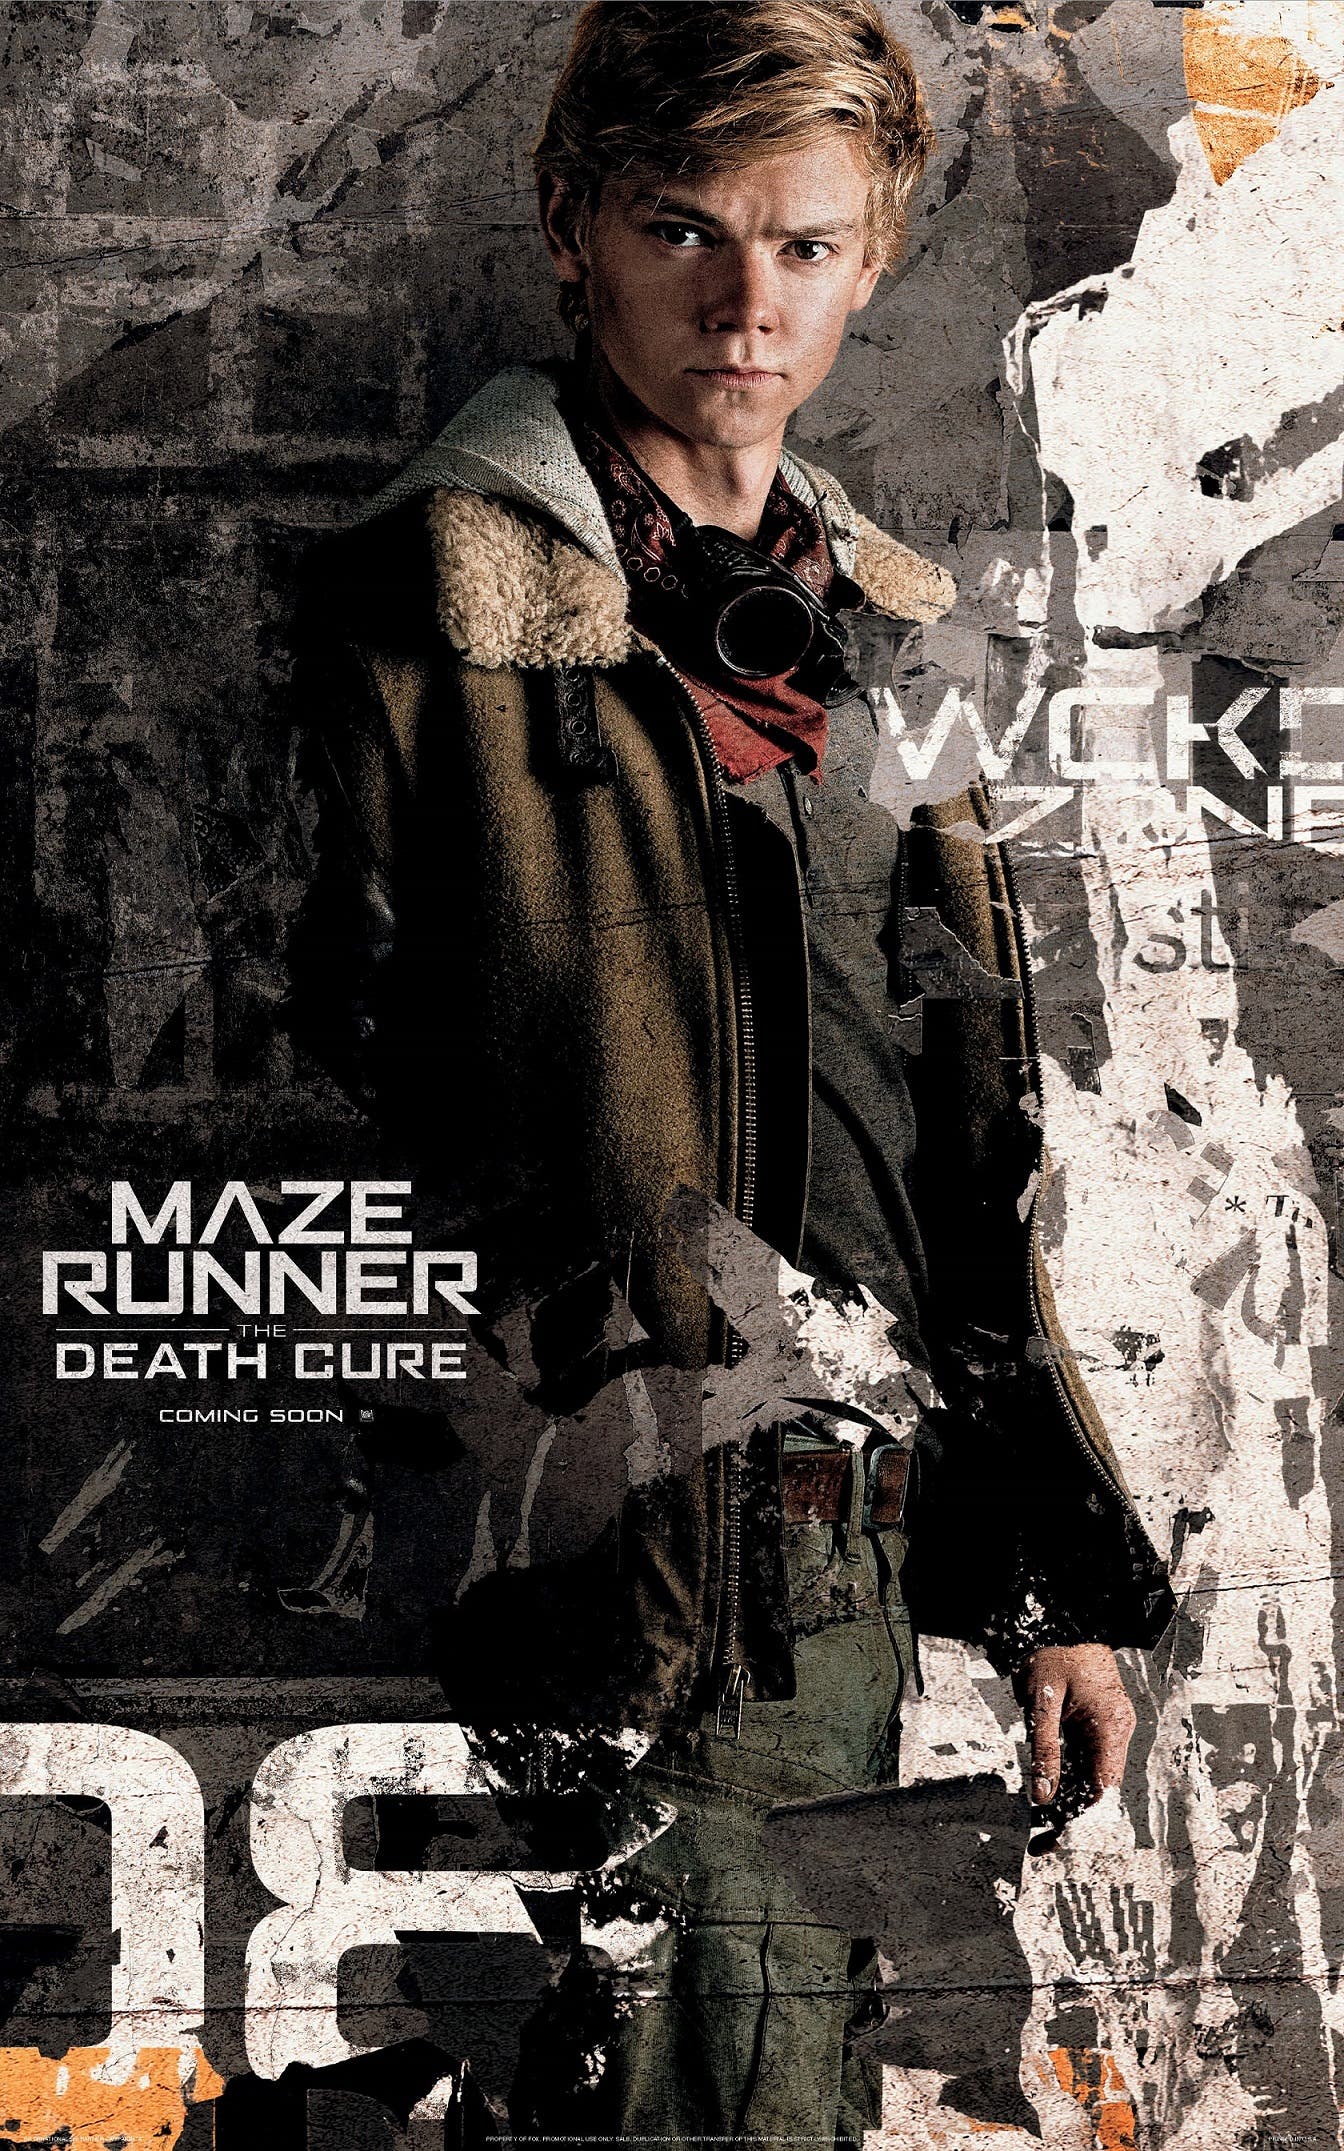 ‘Maze Runner: The Death Cure’ Character Posters and Trailer | Starmometer